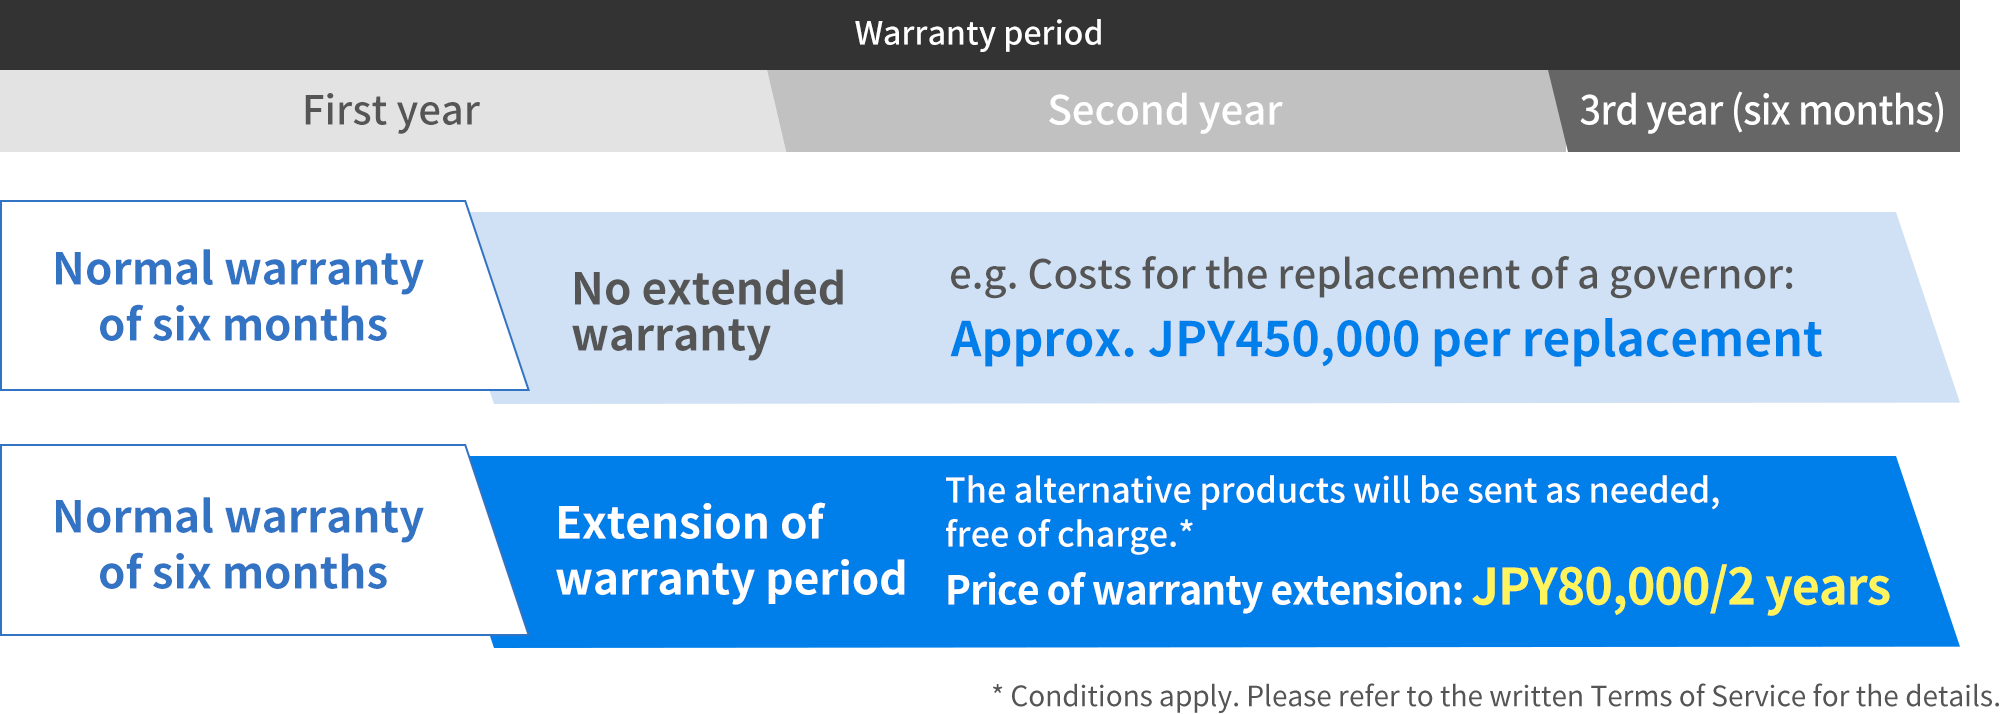 Warranty period First year Second year 3rd year (six months) Normal warranty of six months No extended warranty e.g. Costs for the replacement of a governor: Approx. JPY450,000 per replacement Normal warranty of six months Extension of warranty period The alternative products will be sent as needed, free of charge.* Price of warranty extension: JPY80,000/2 years * Conditions apply. Please refer to the written Terms of Service for the details.